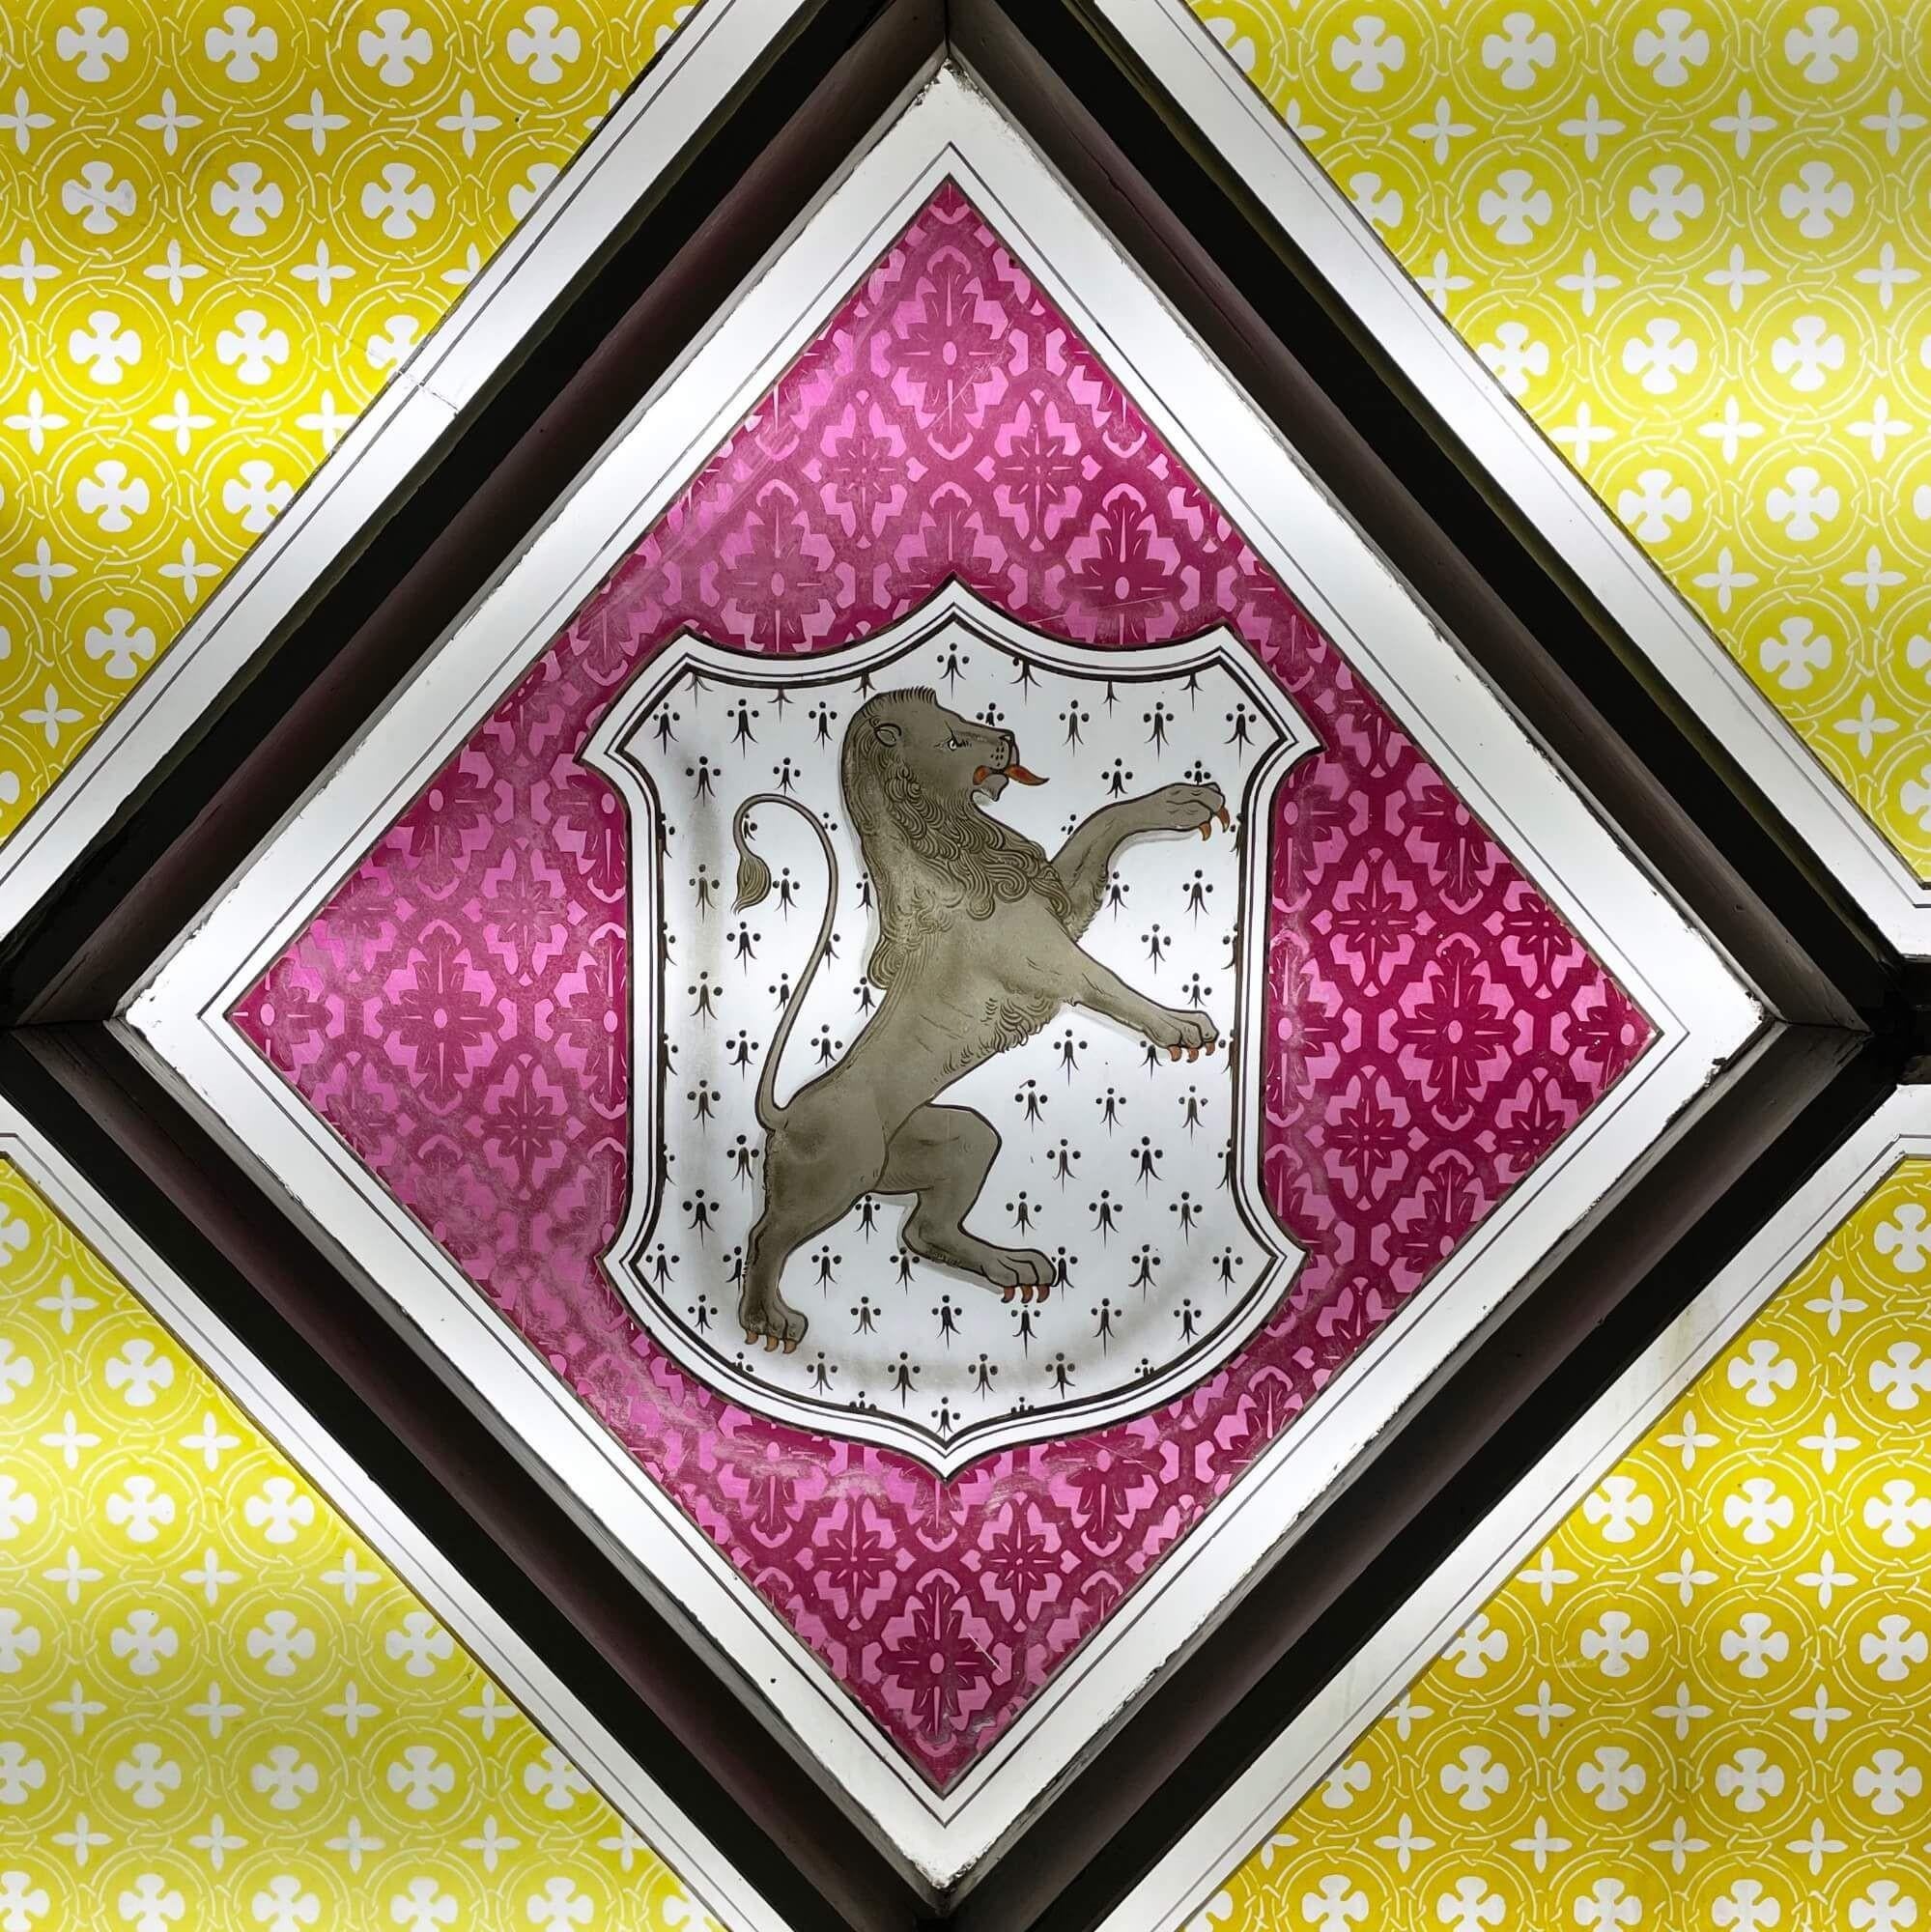 A large antique stained glass window detailed with the armorial crest of the Welsh family of Tudor Trefor, one of a series of 3 we are selling in the same style. At more than a metre square, this window is an impressive piece and features four